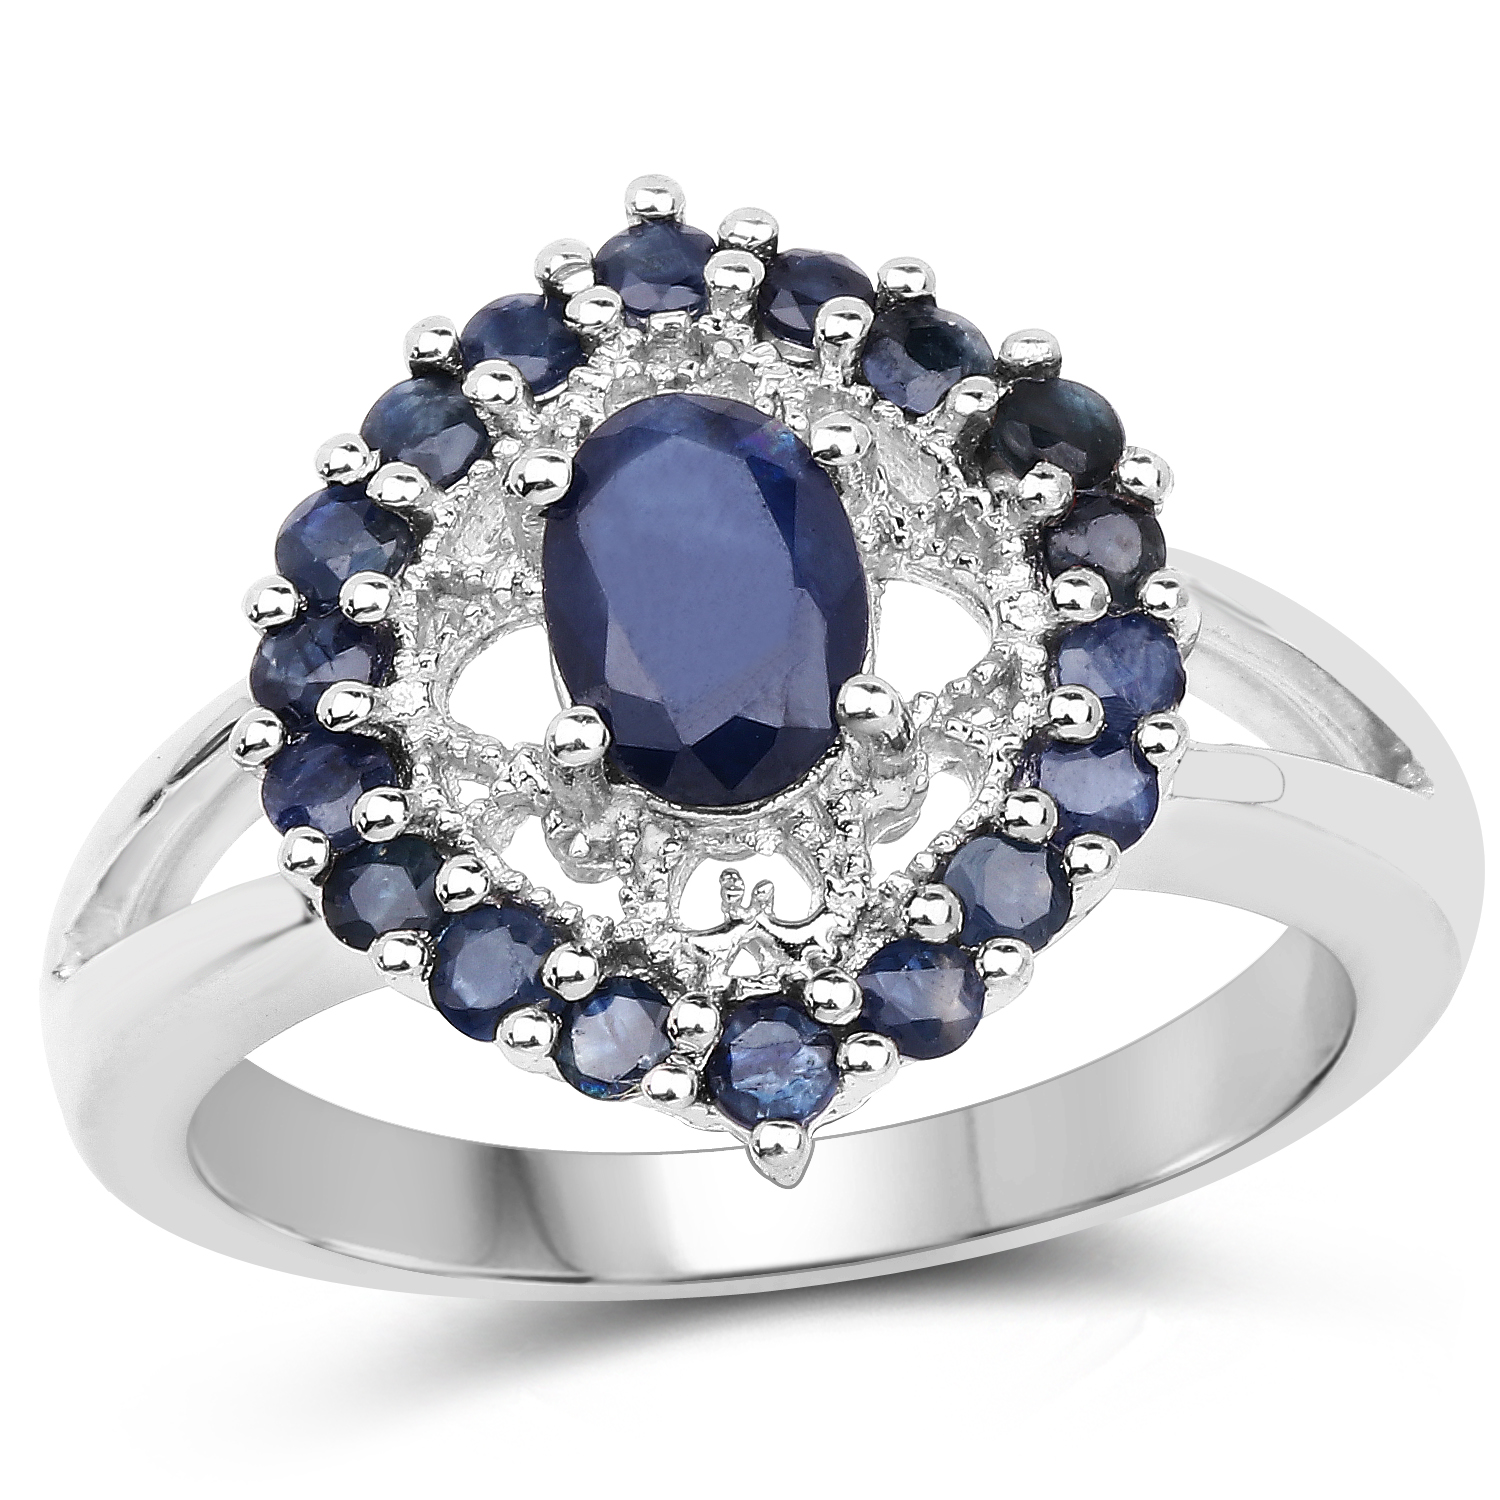 1.76 ct. tw. Blue Sapphire Cocktail Sterling Silver Ring